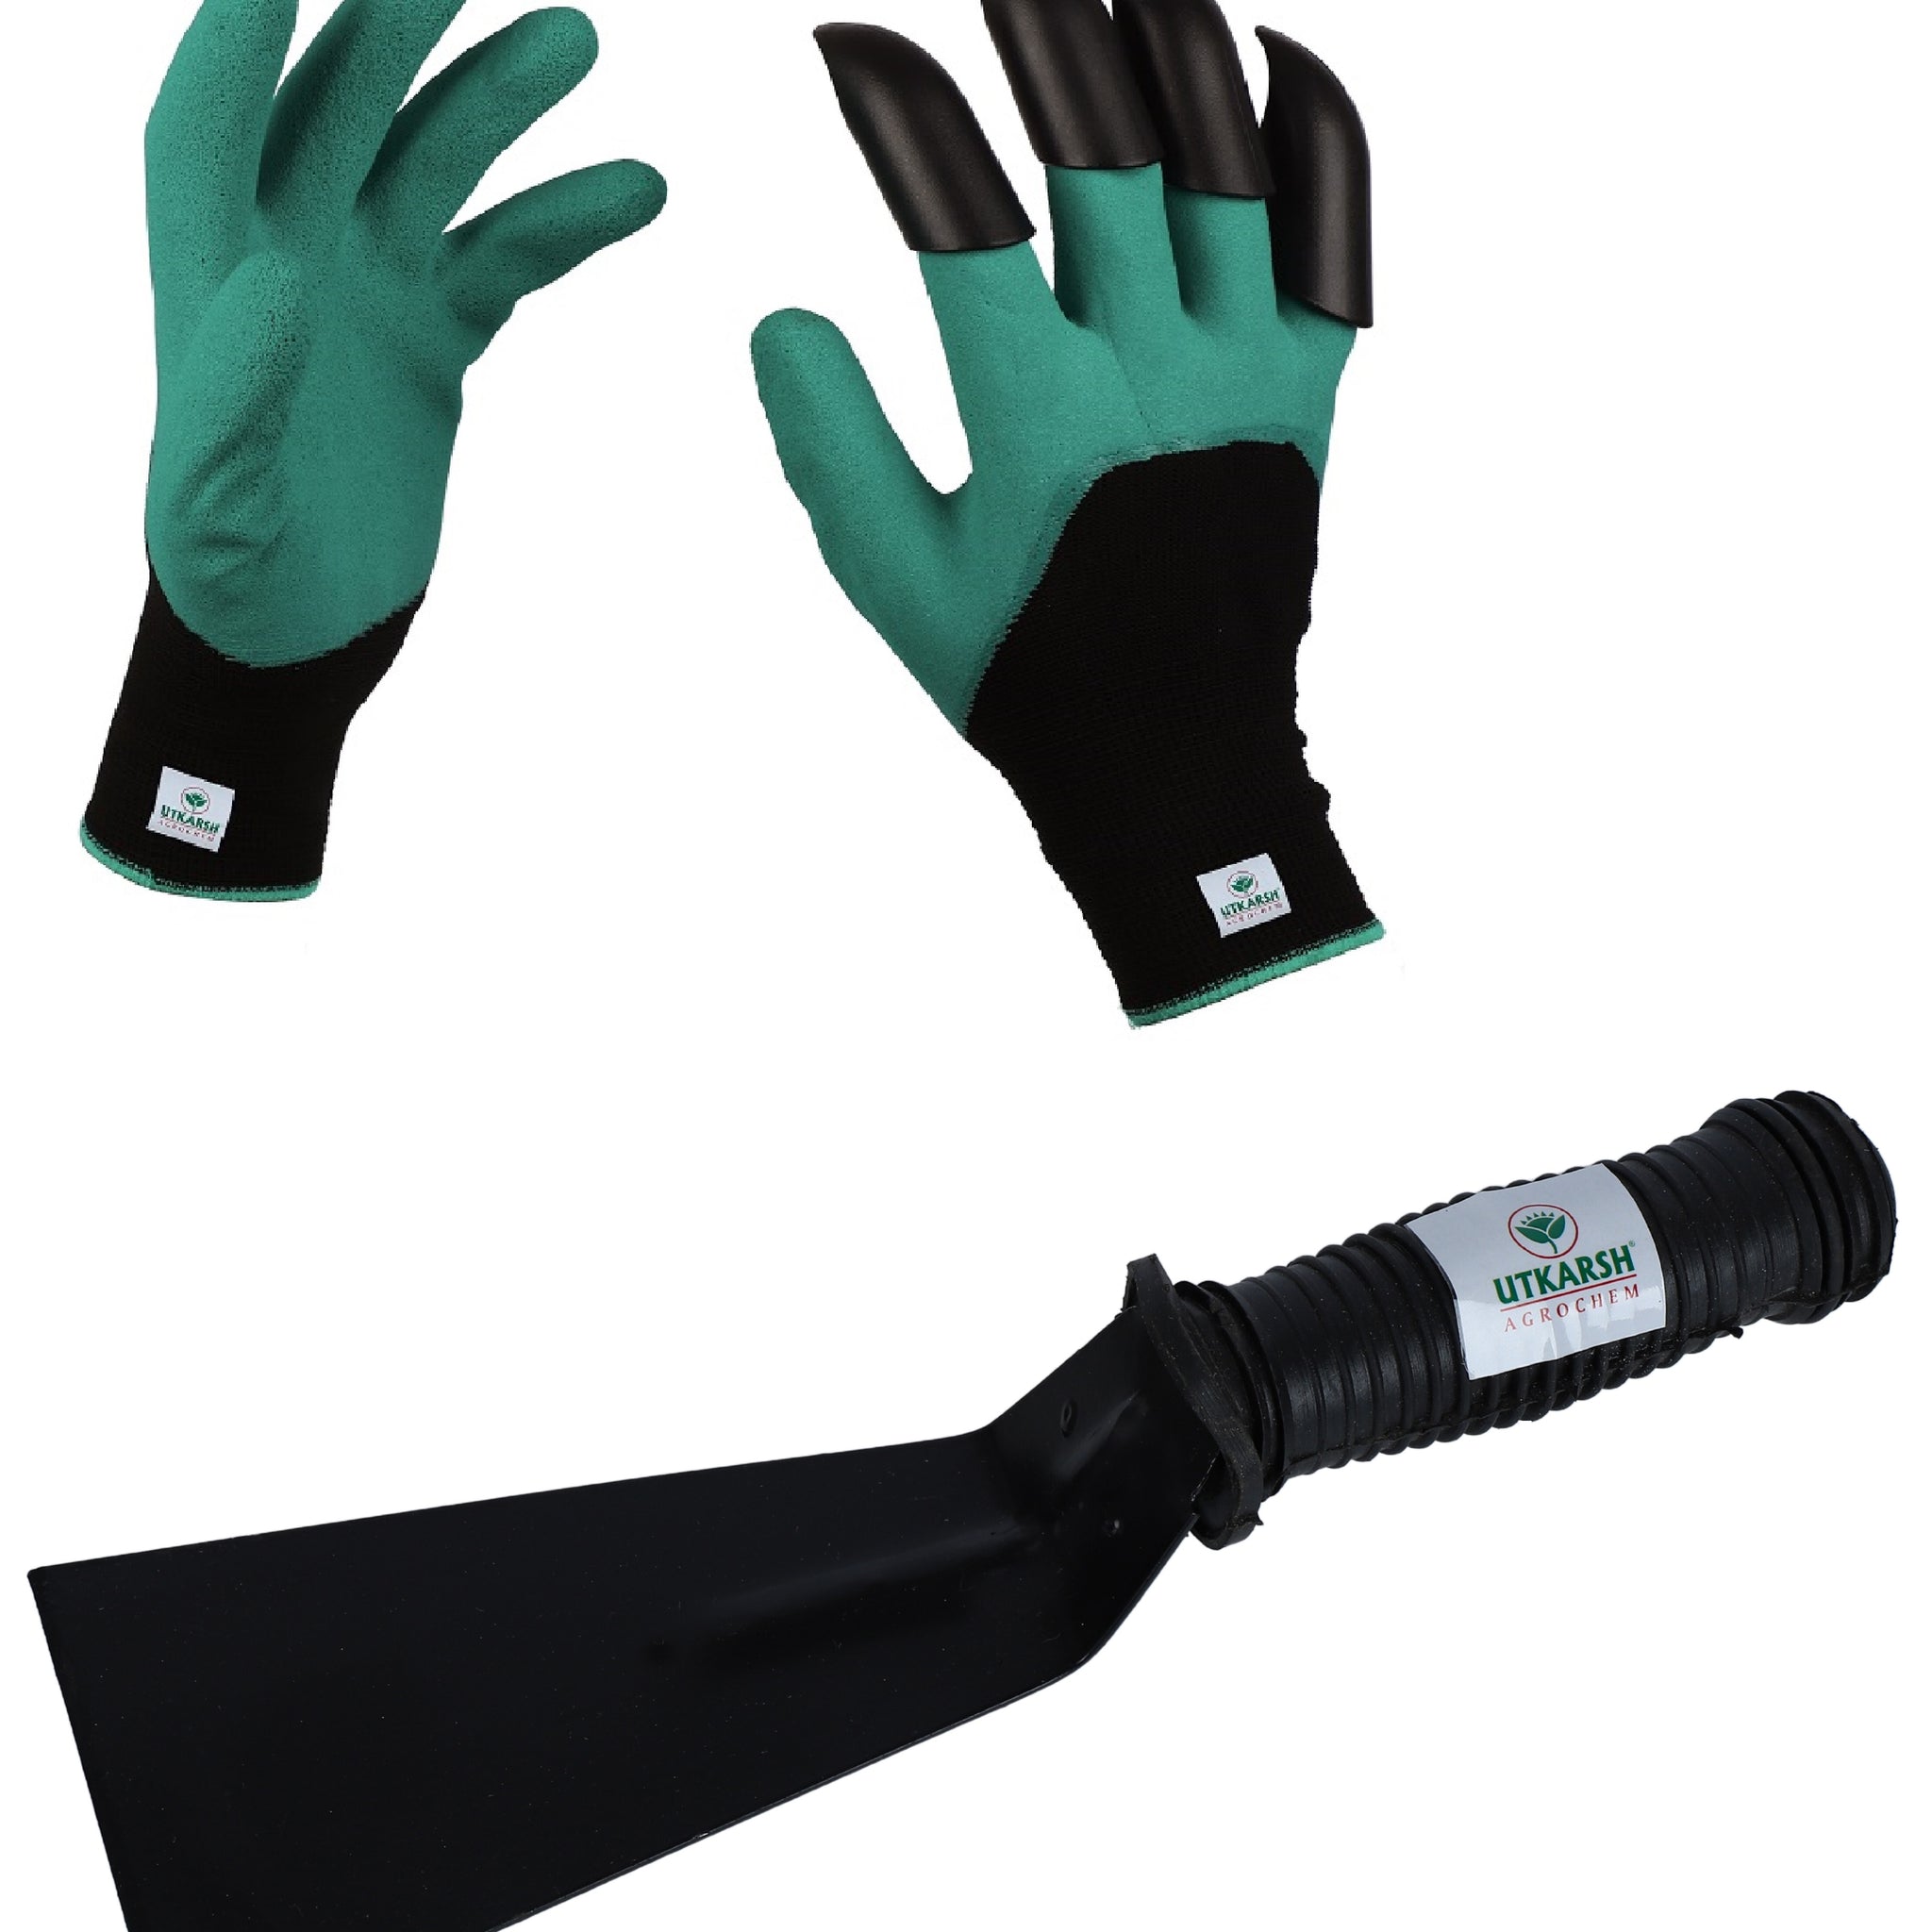 Utkarsh 3 inch Khurpi & Gloves with Right Hand Fingertip ABS Claws for Home Gardening Tools Kit | Essential Handy Planting Tools - Spade for Soil Digging | Terrace Garden Accessories - Set of 2 Items